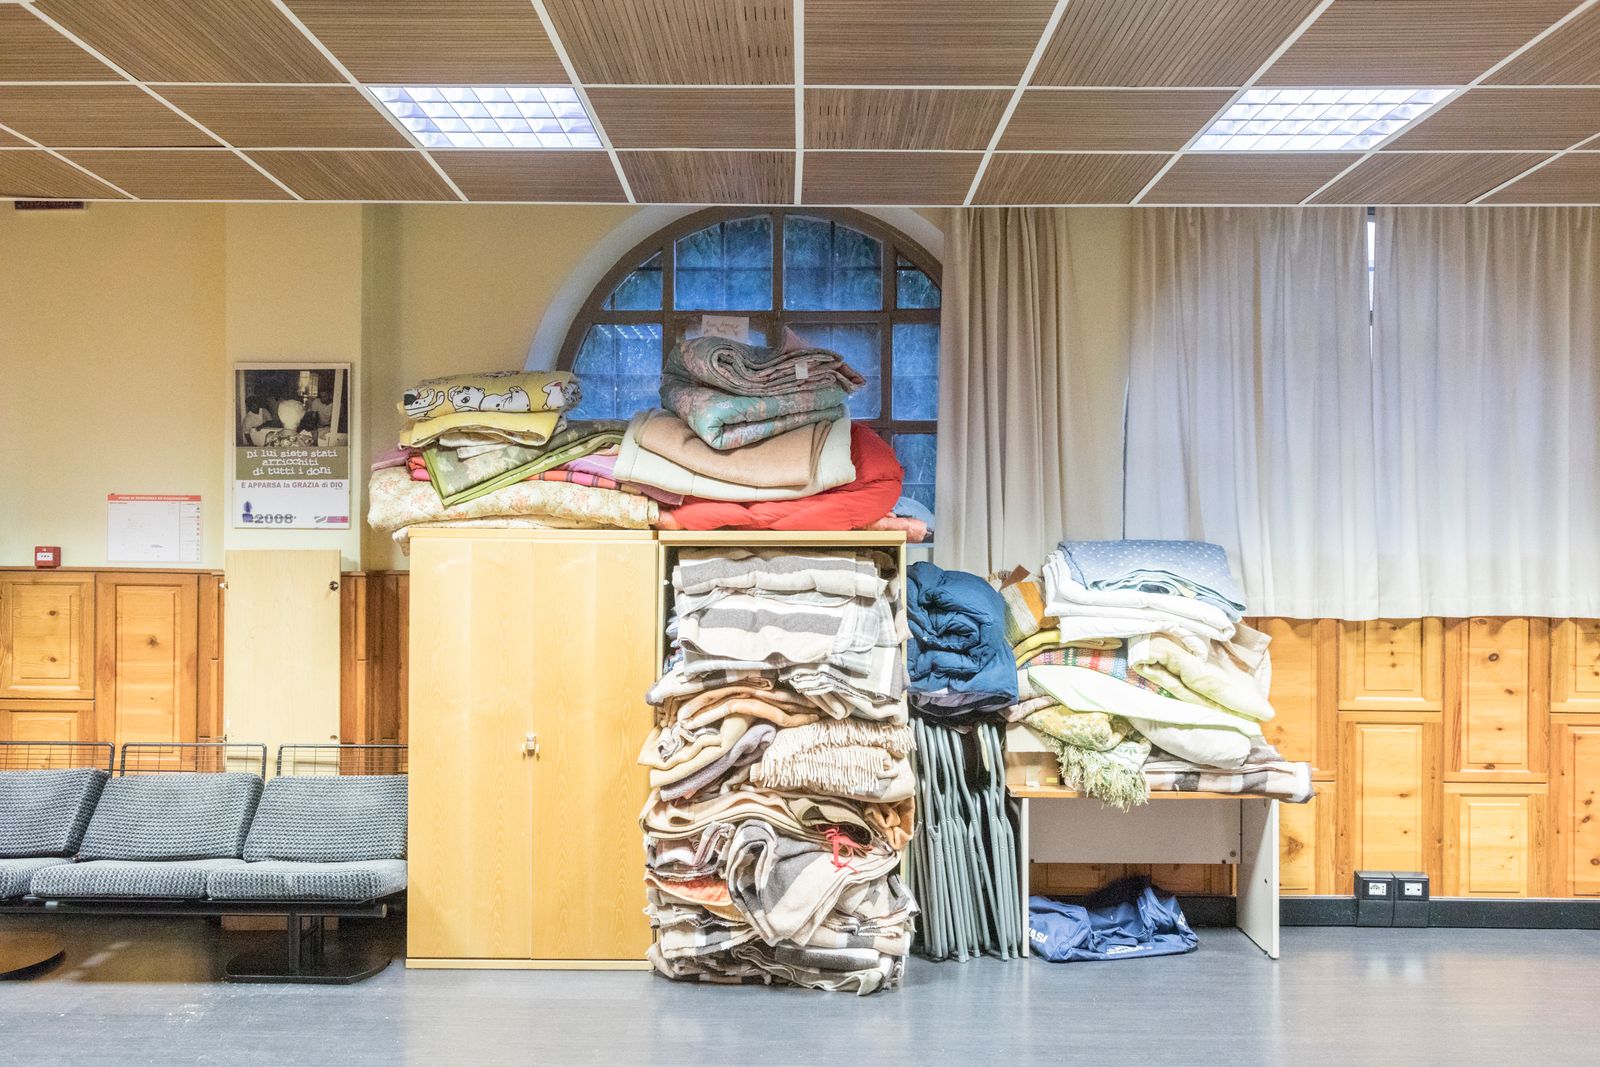 © Manuela Schirra and Fabrizio Giraldi  - Image from the MIGRANTS ROOM photography project